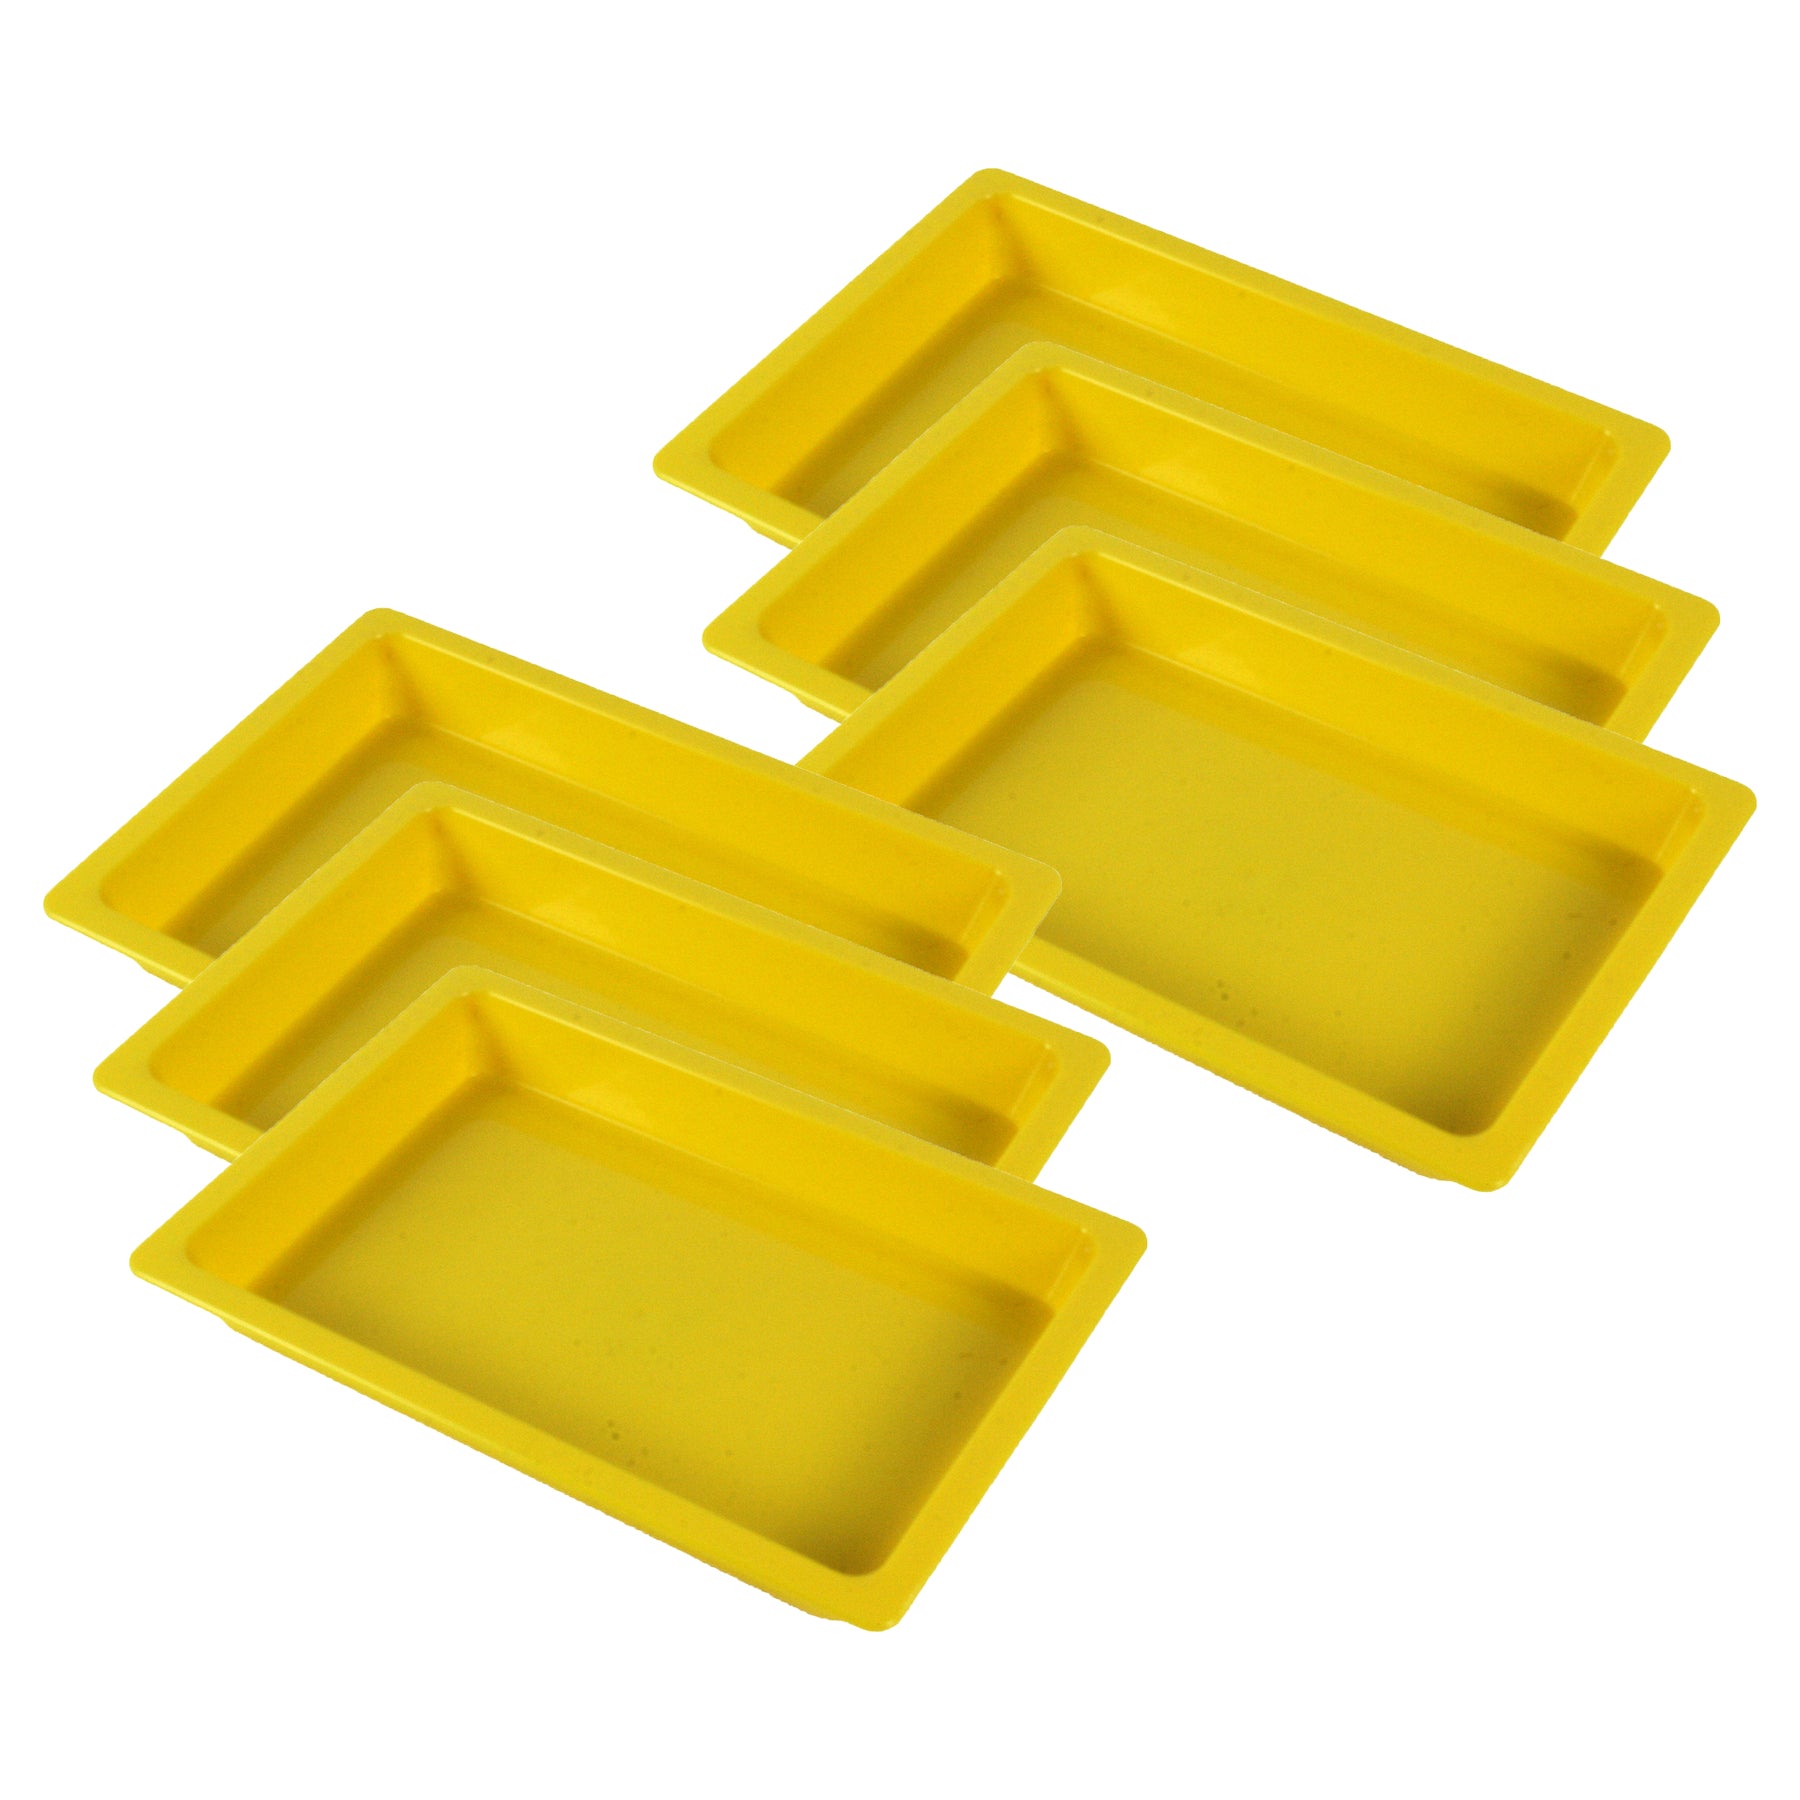 Small Creativitray®, Yellow, Pack of 6 - A1 School Supplies